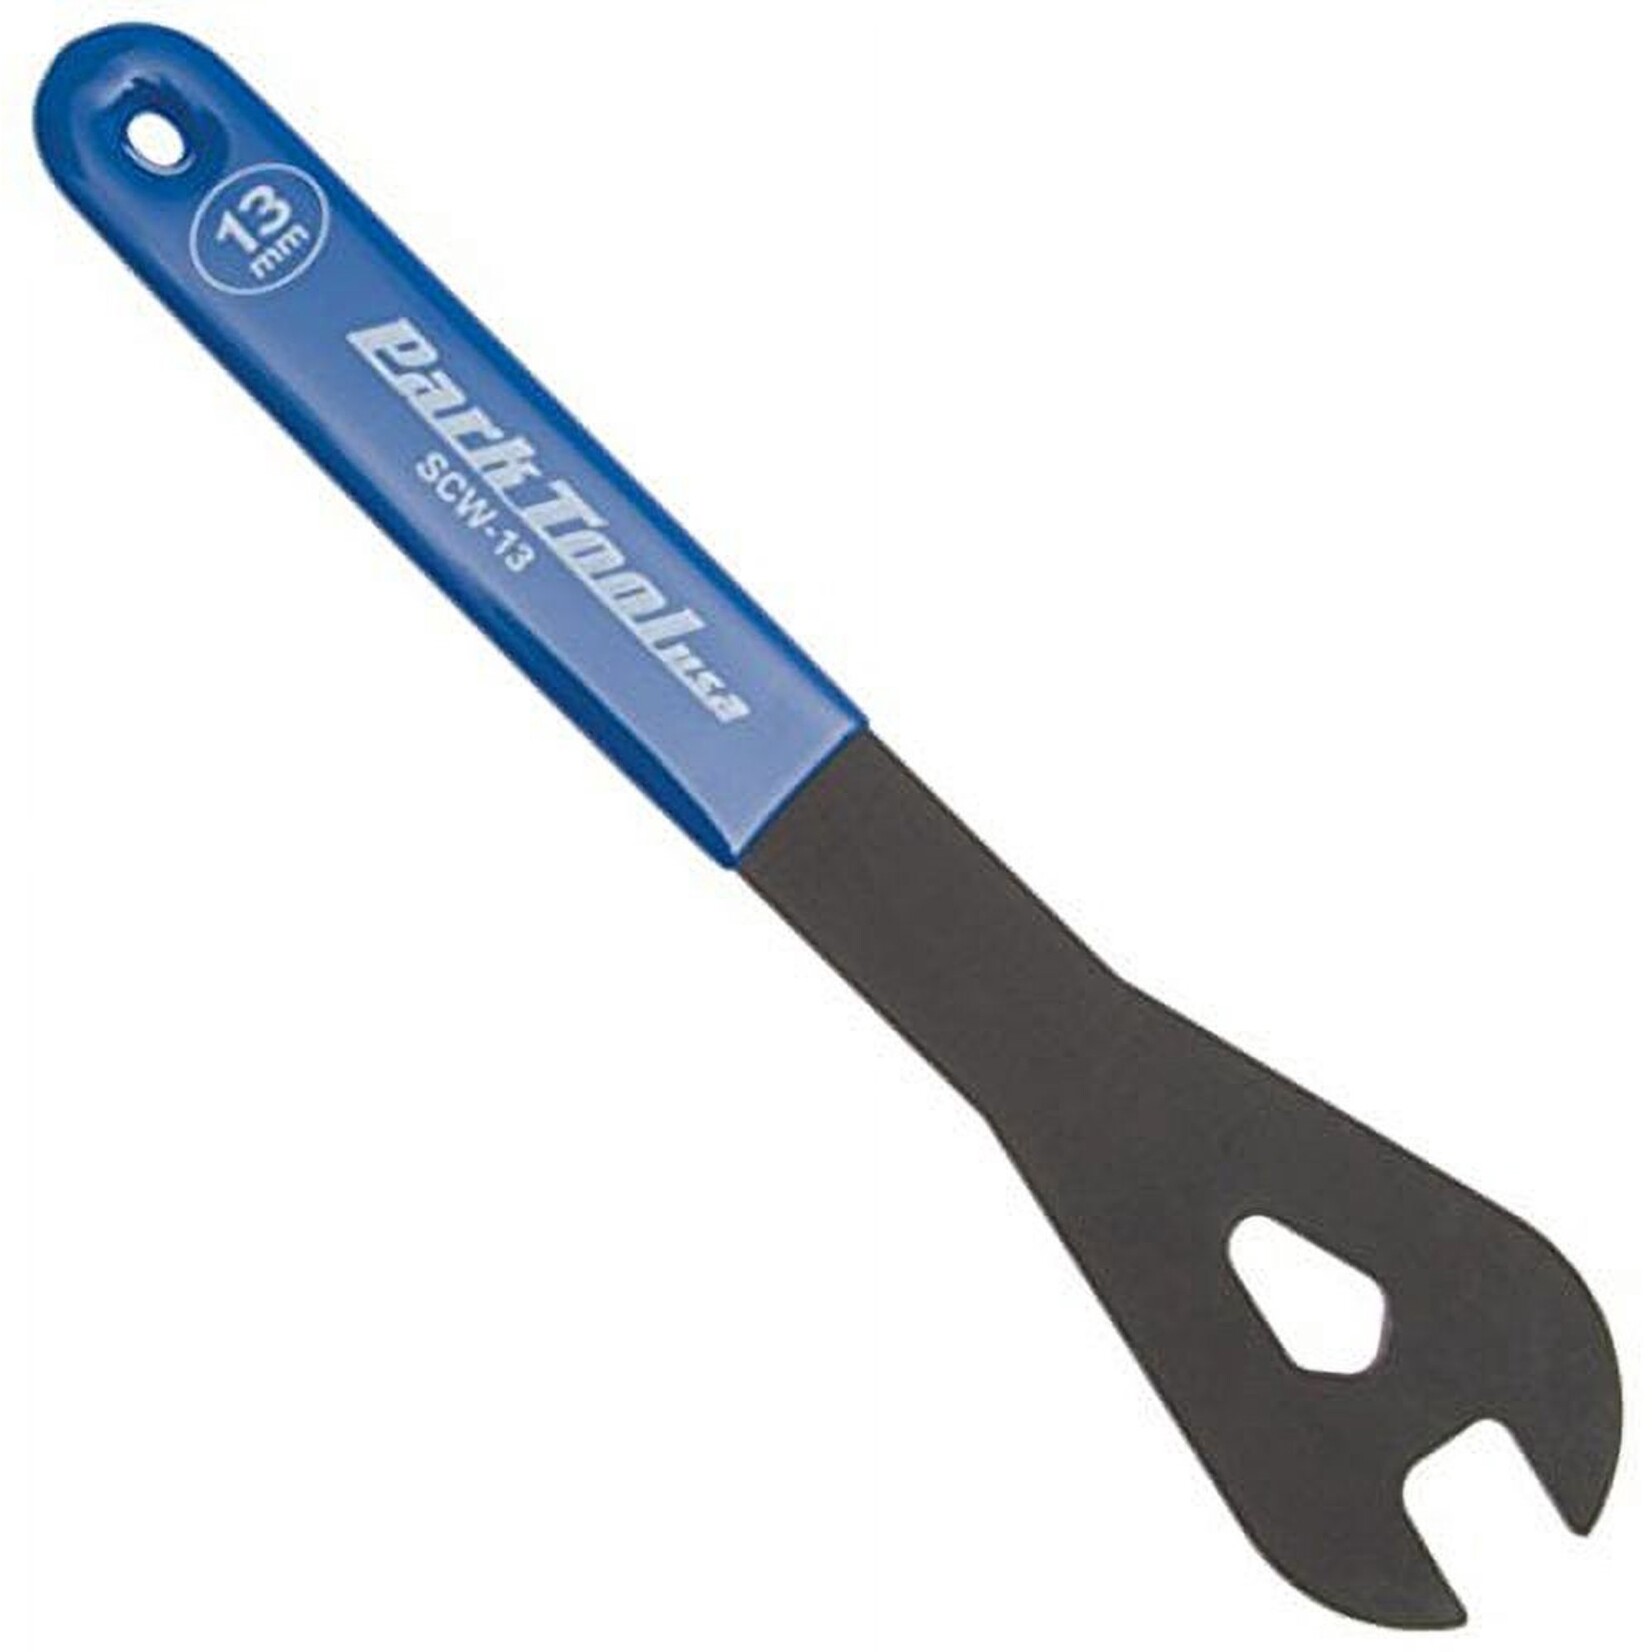 PARK TOOL Park Tool SCW-13 Cone Wrench, 13mm